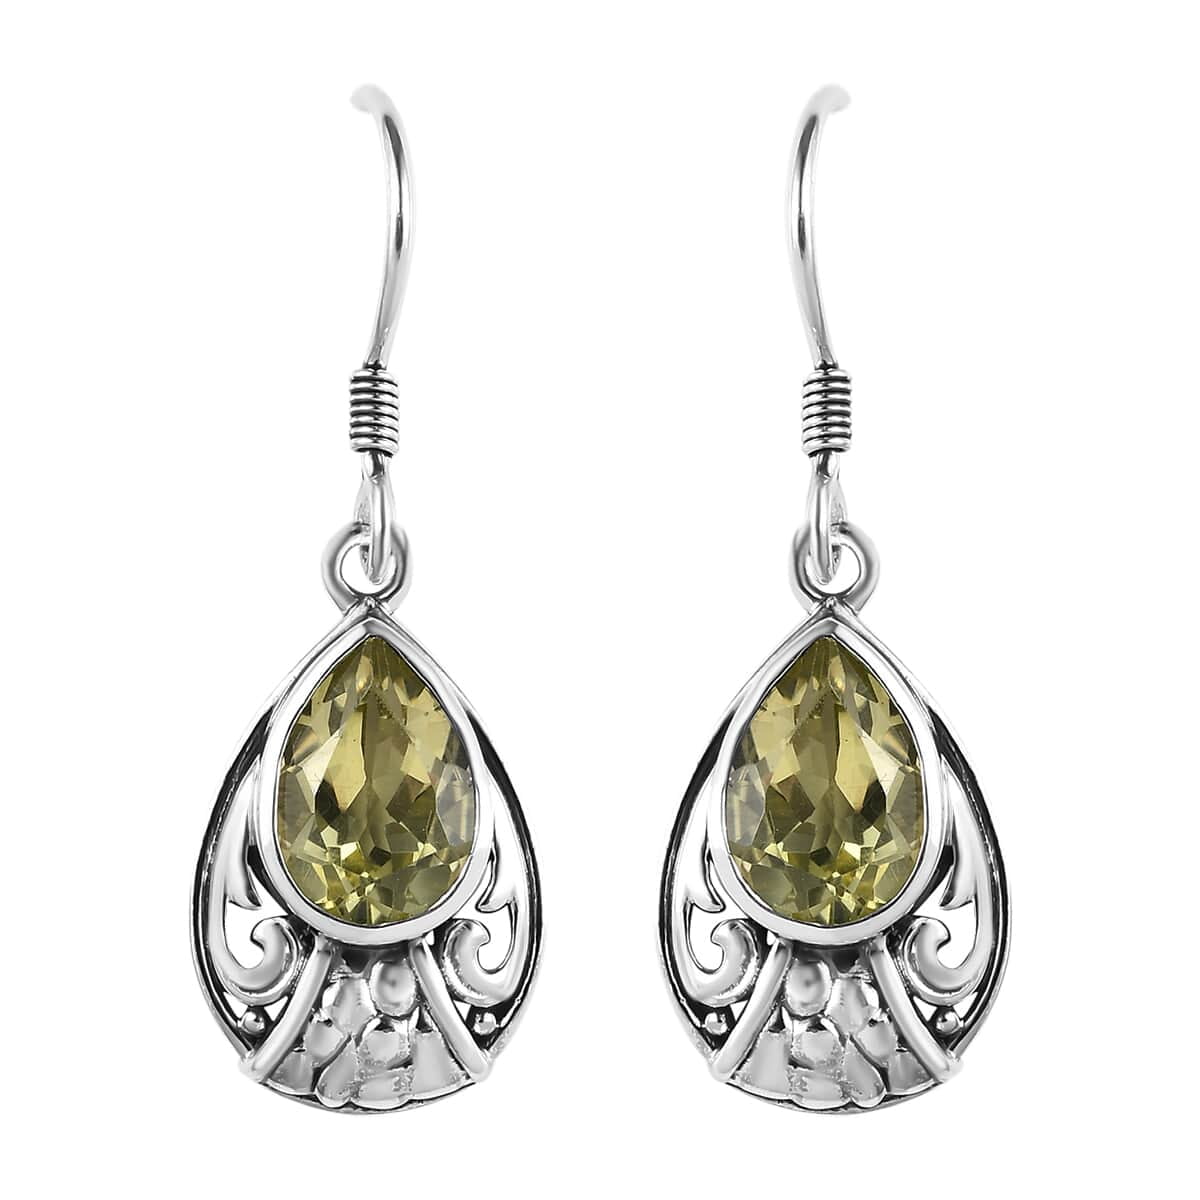 Shop LC Artisan Crafted Quartz Pear 925 Sterling Silver Dangle Drop Earrings for Women Jewelry Gifts ct 2.95 Birthday Gifts Christmas Gifts for Women